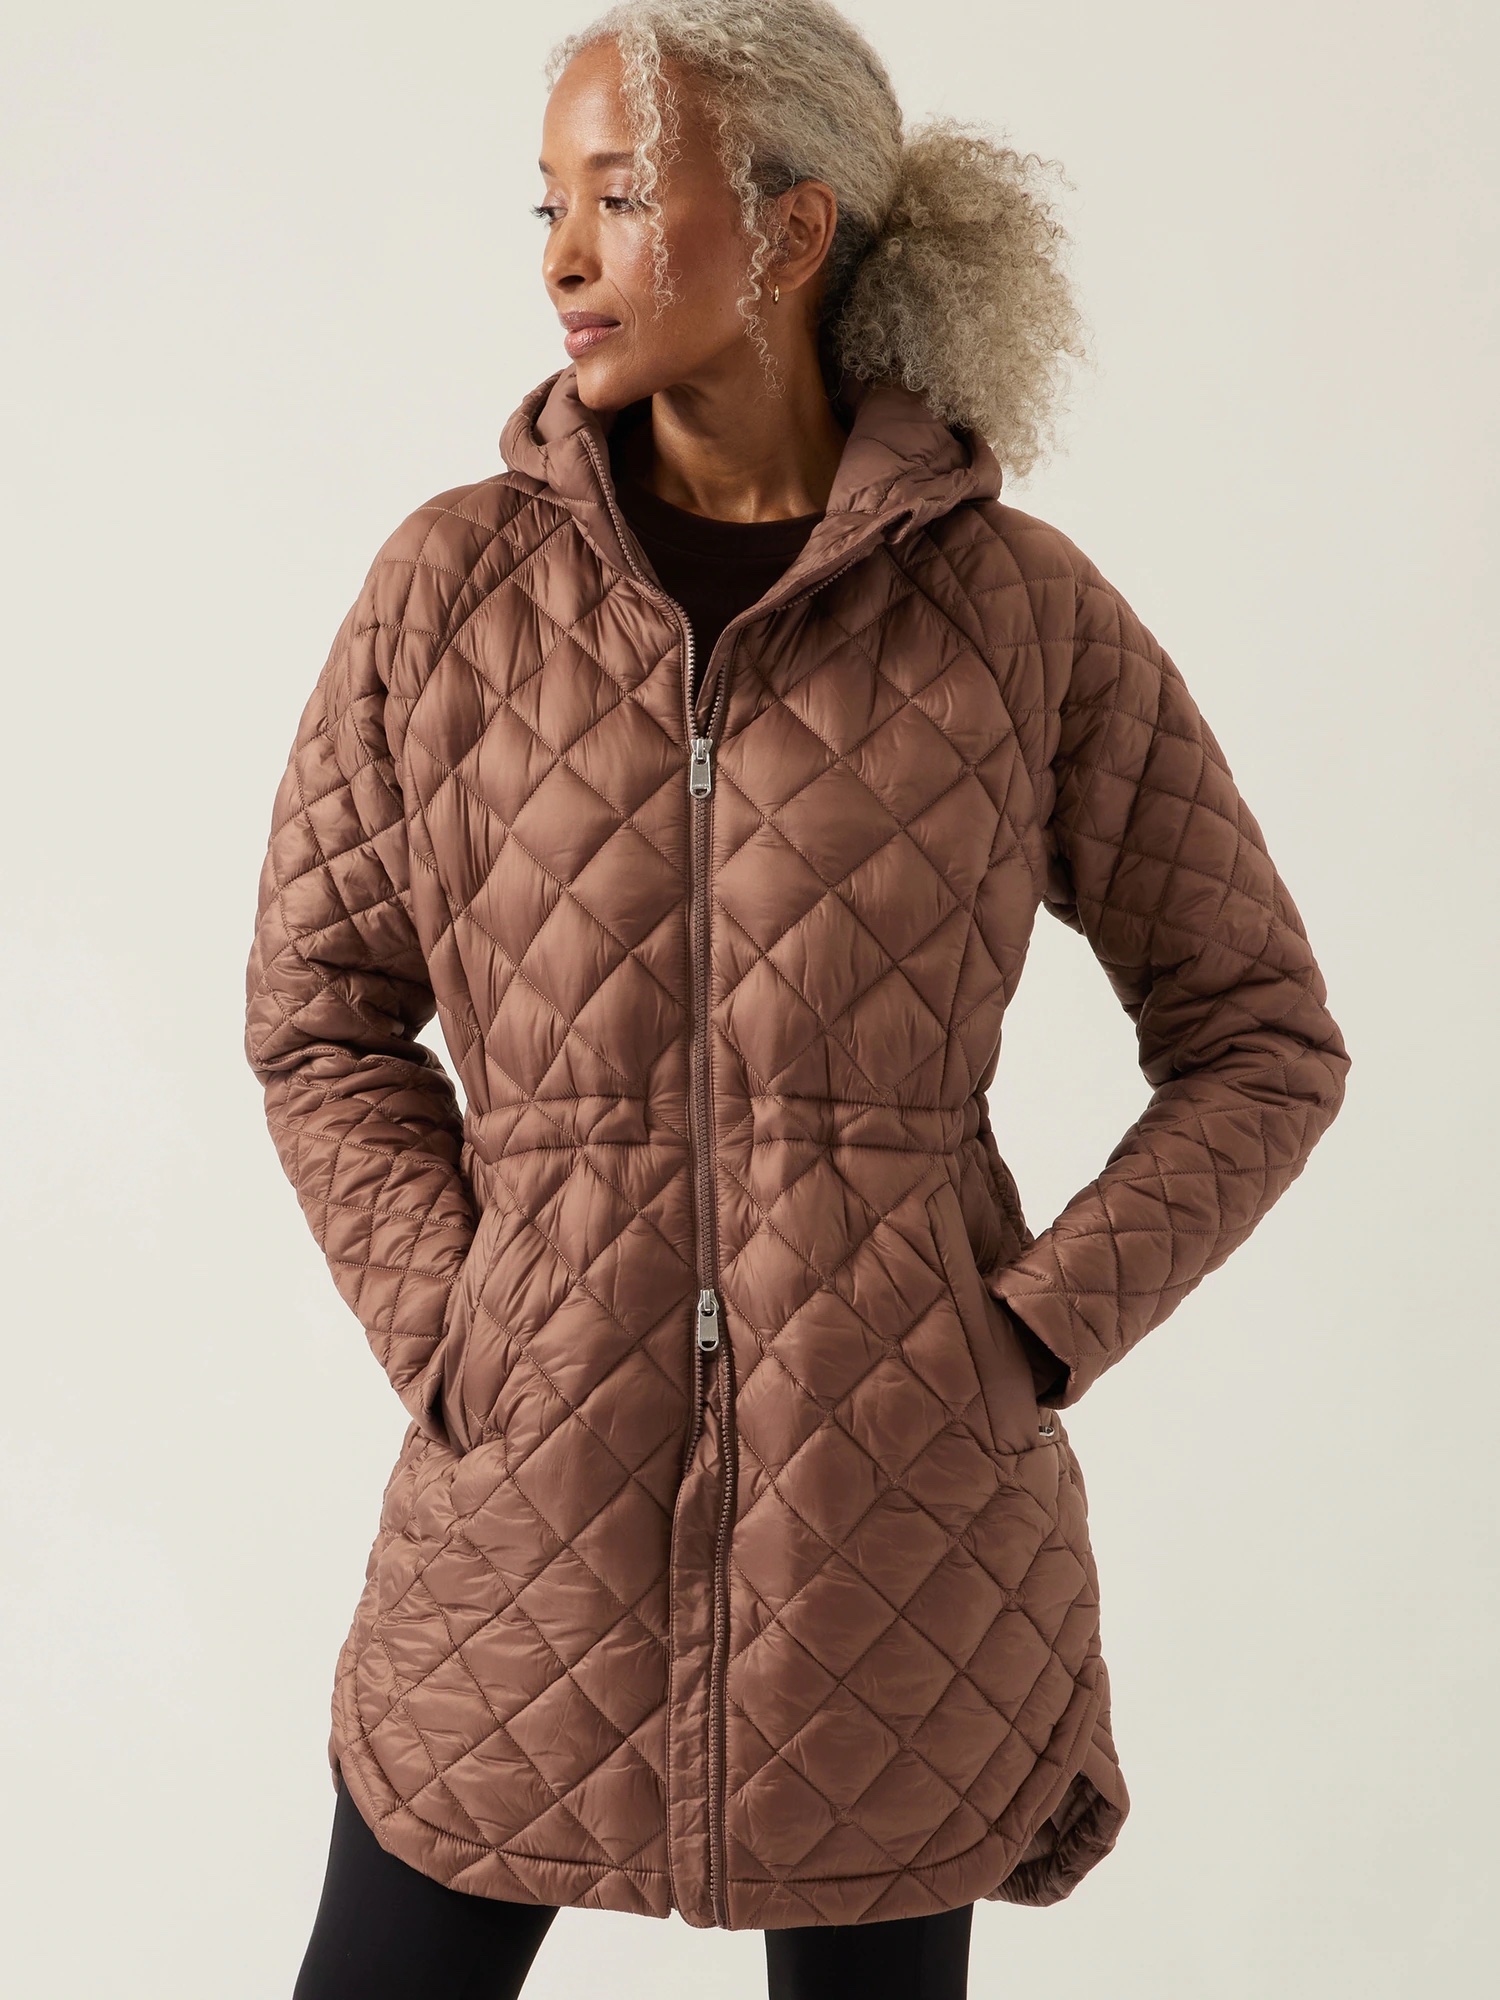 24 sustainable winter jackets and coats perfect for chilly weather